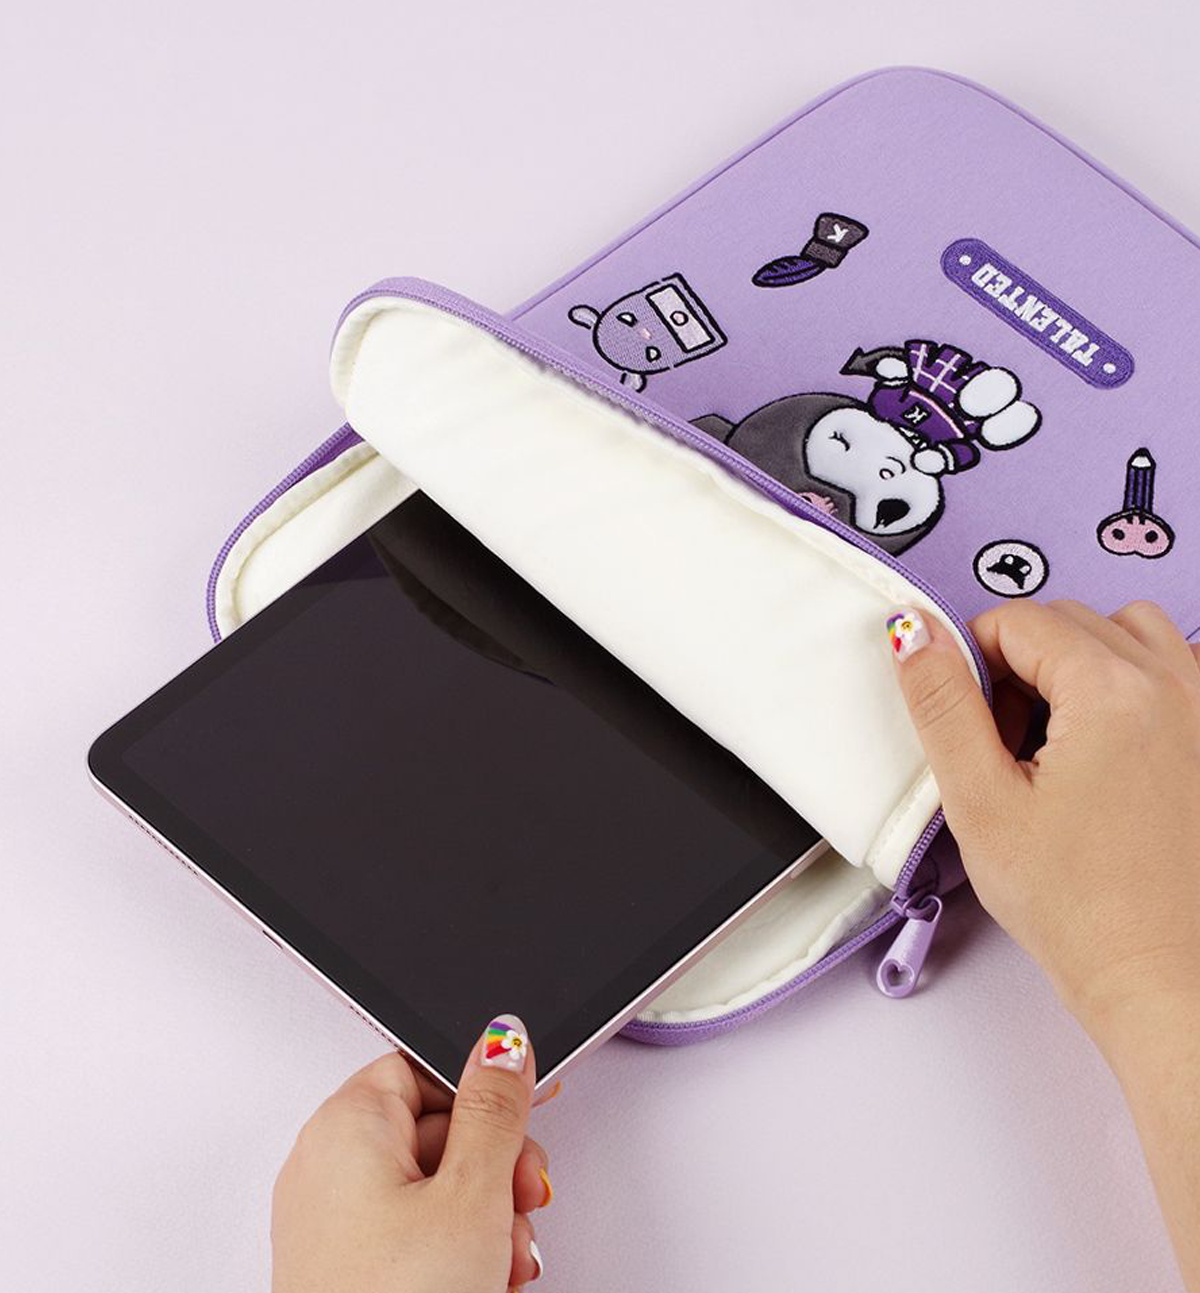 Sanrio Characters 11" Laptop Pouch